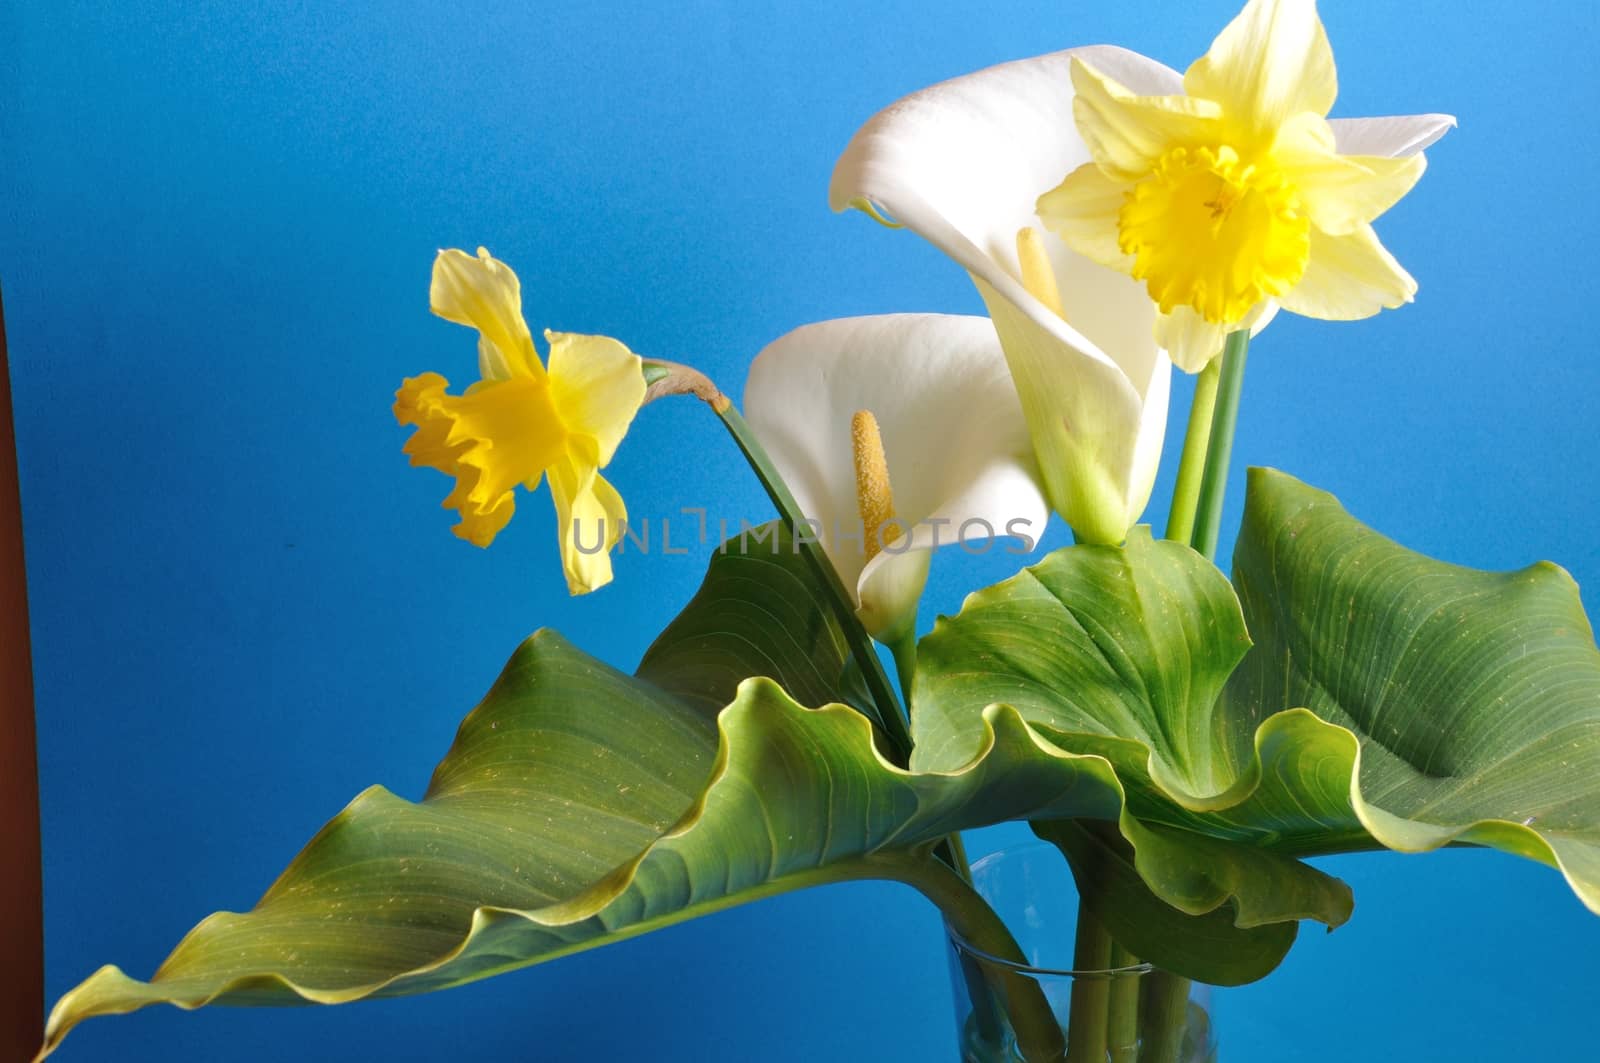 Arum lilies and daffodils